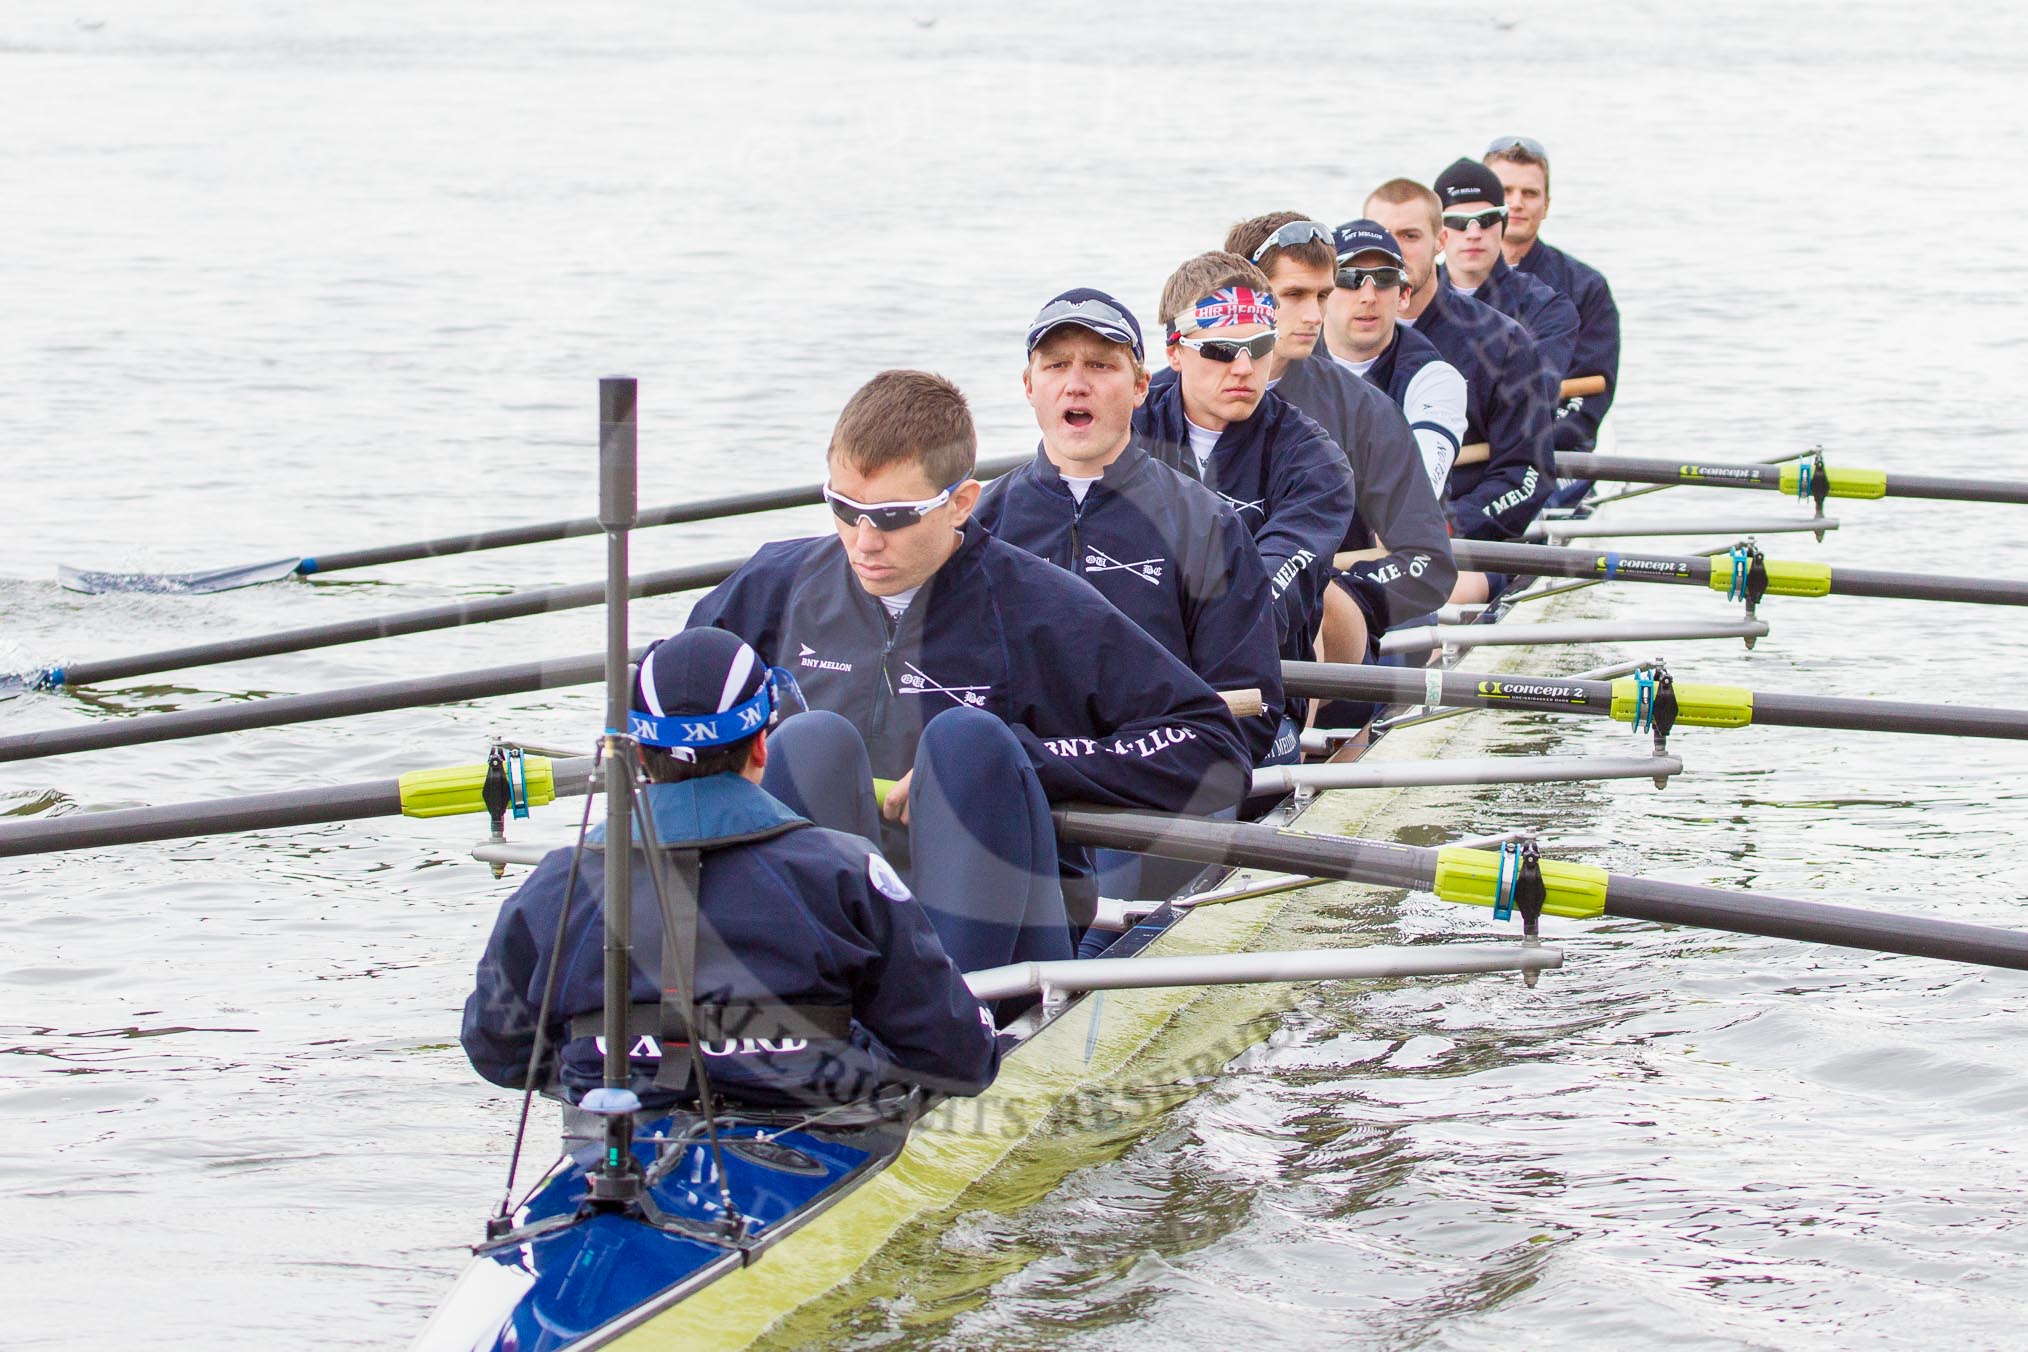 The Boat Race 2013.
Putney,
London SW15,

United Kingdom,
on 31 March 2013 at 15:48, image #167